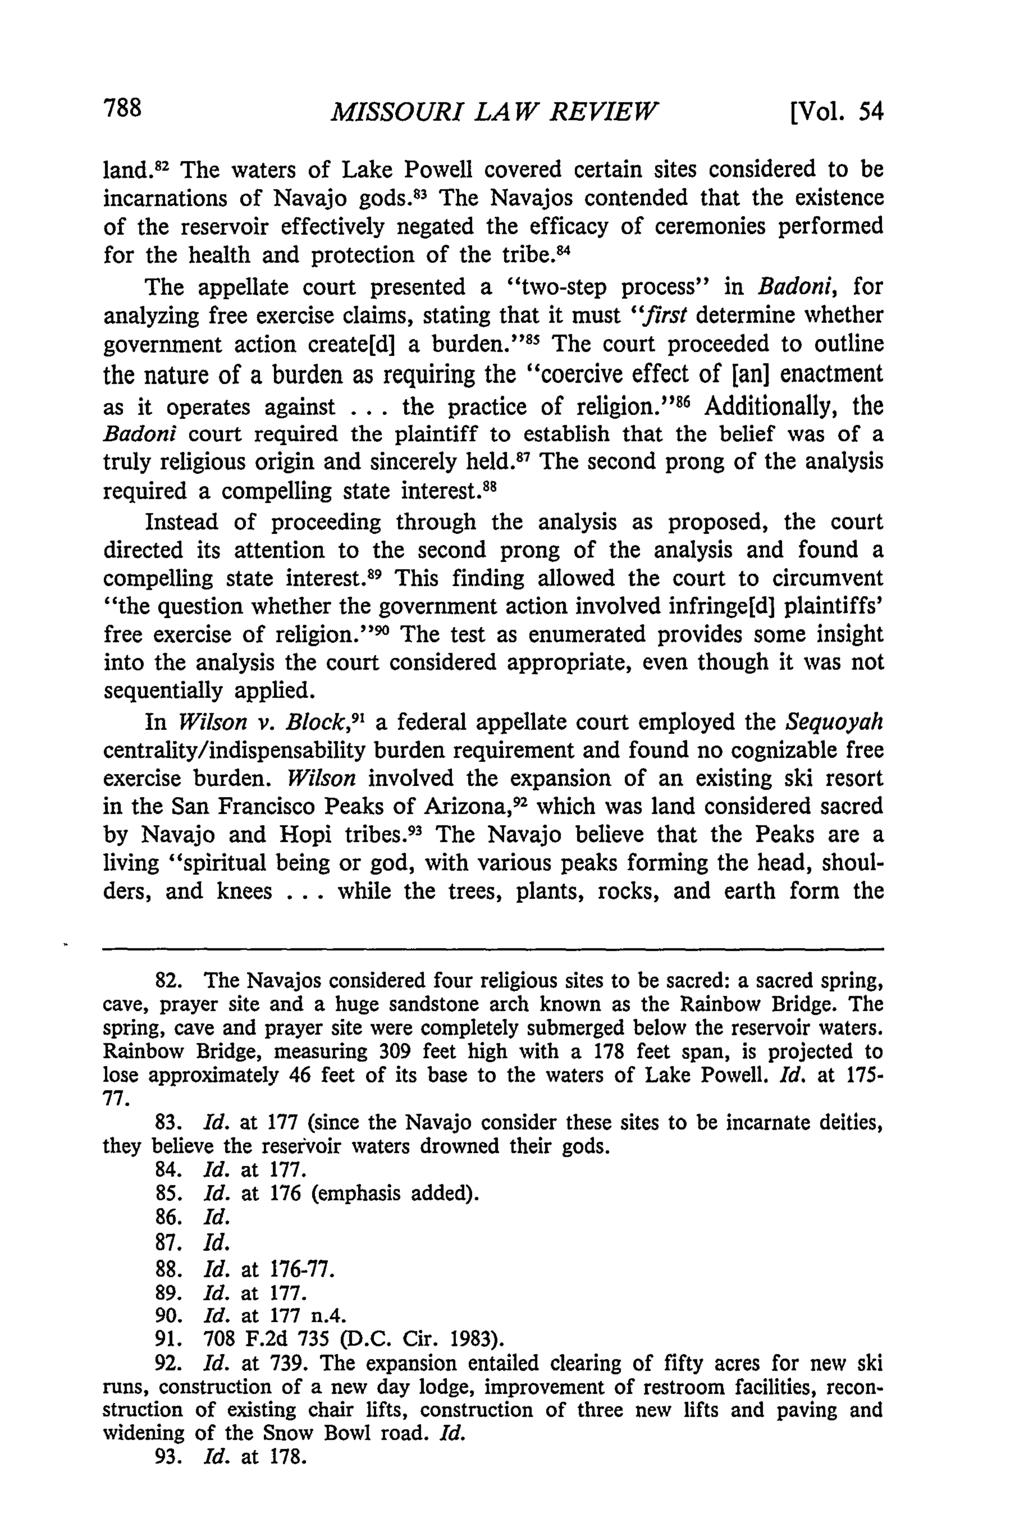 Missouri Law Review, Vol. 54, Iss. 3 [1989], Art. 10 MISSOURI LAW REVIEW [Vol. 54 land.1 2 The waters of Lake Powell covered certain sites considered to be incarnations of Navajo gods.